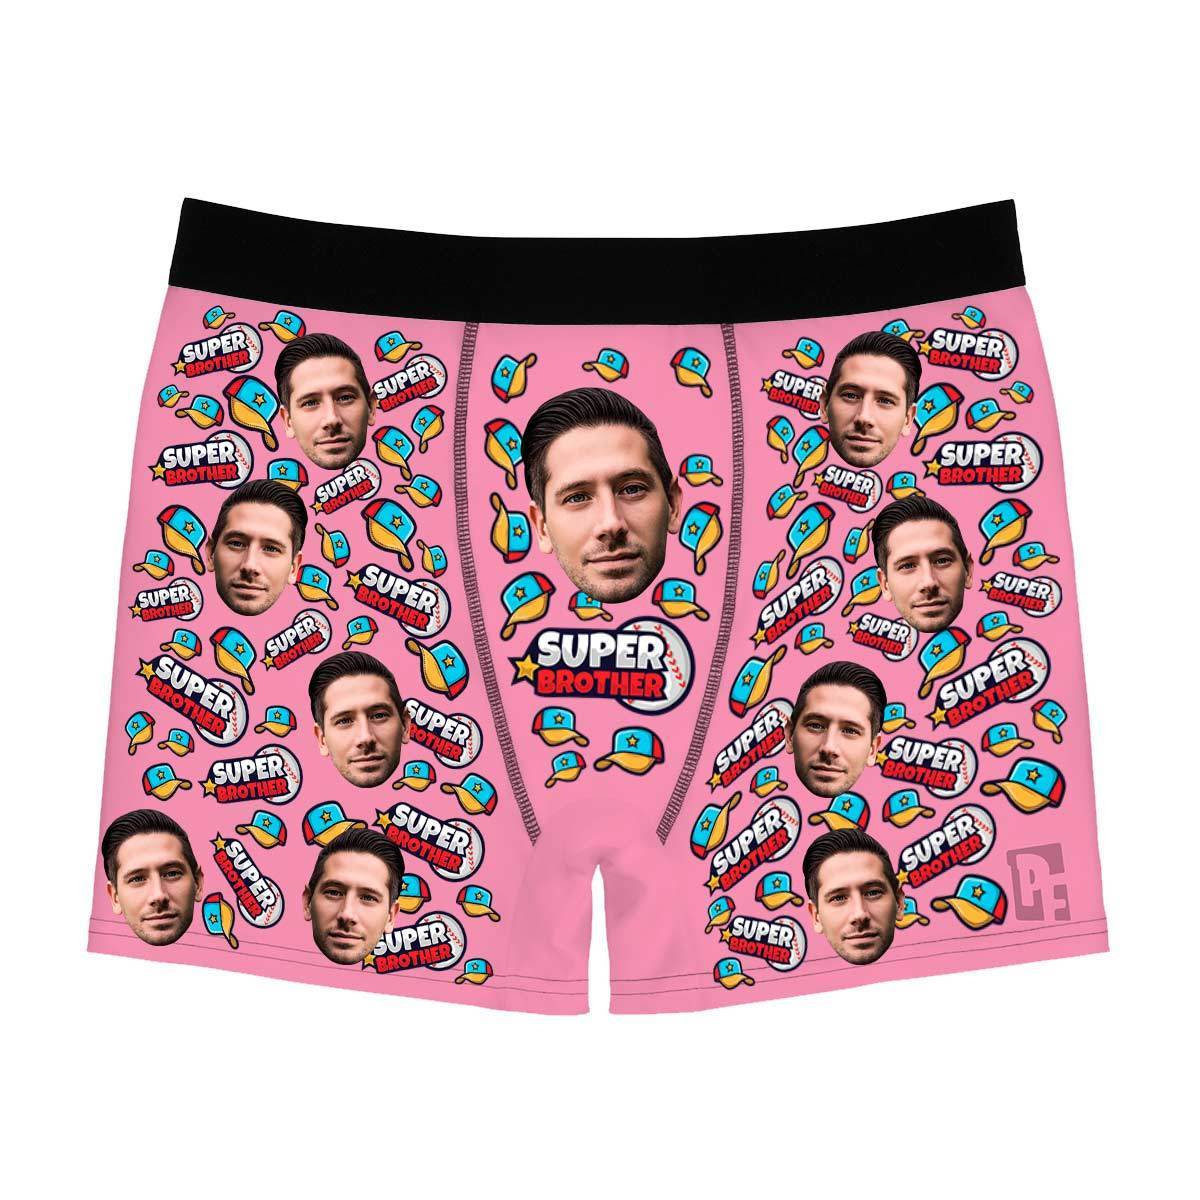 Pink Super Brother men's boxer briefs personalized with photo printed on them